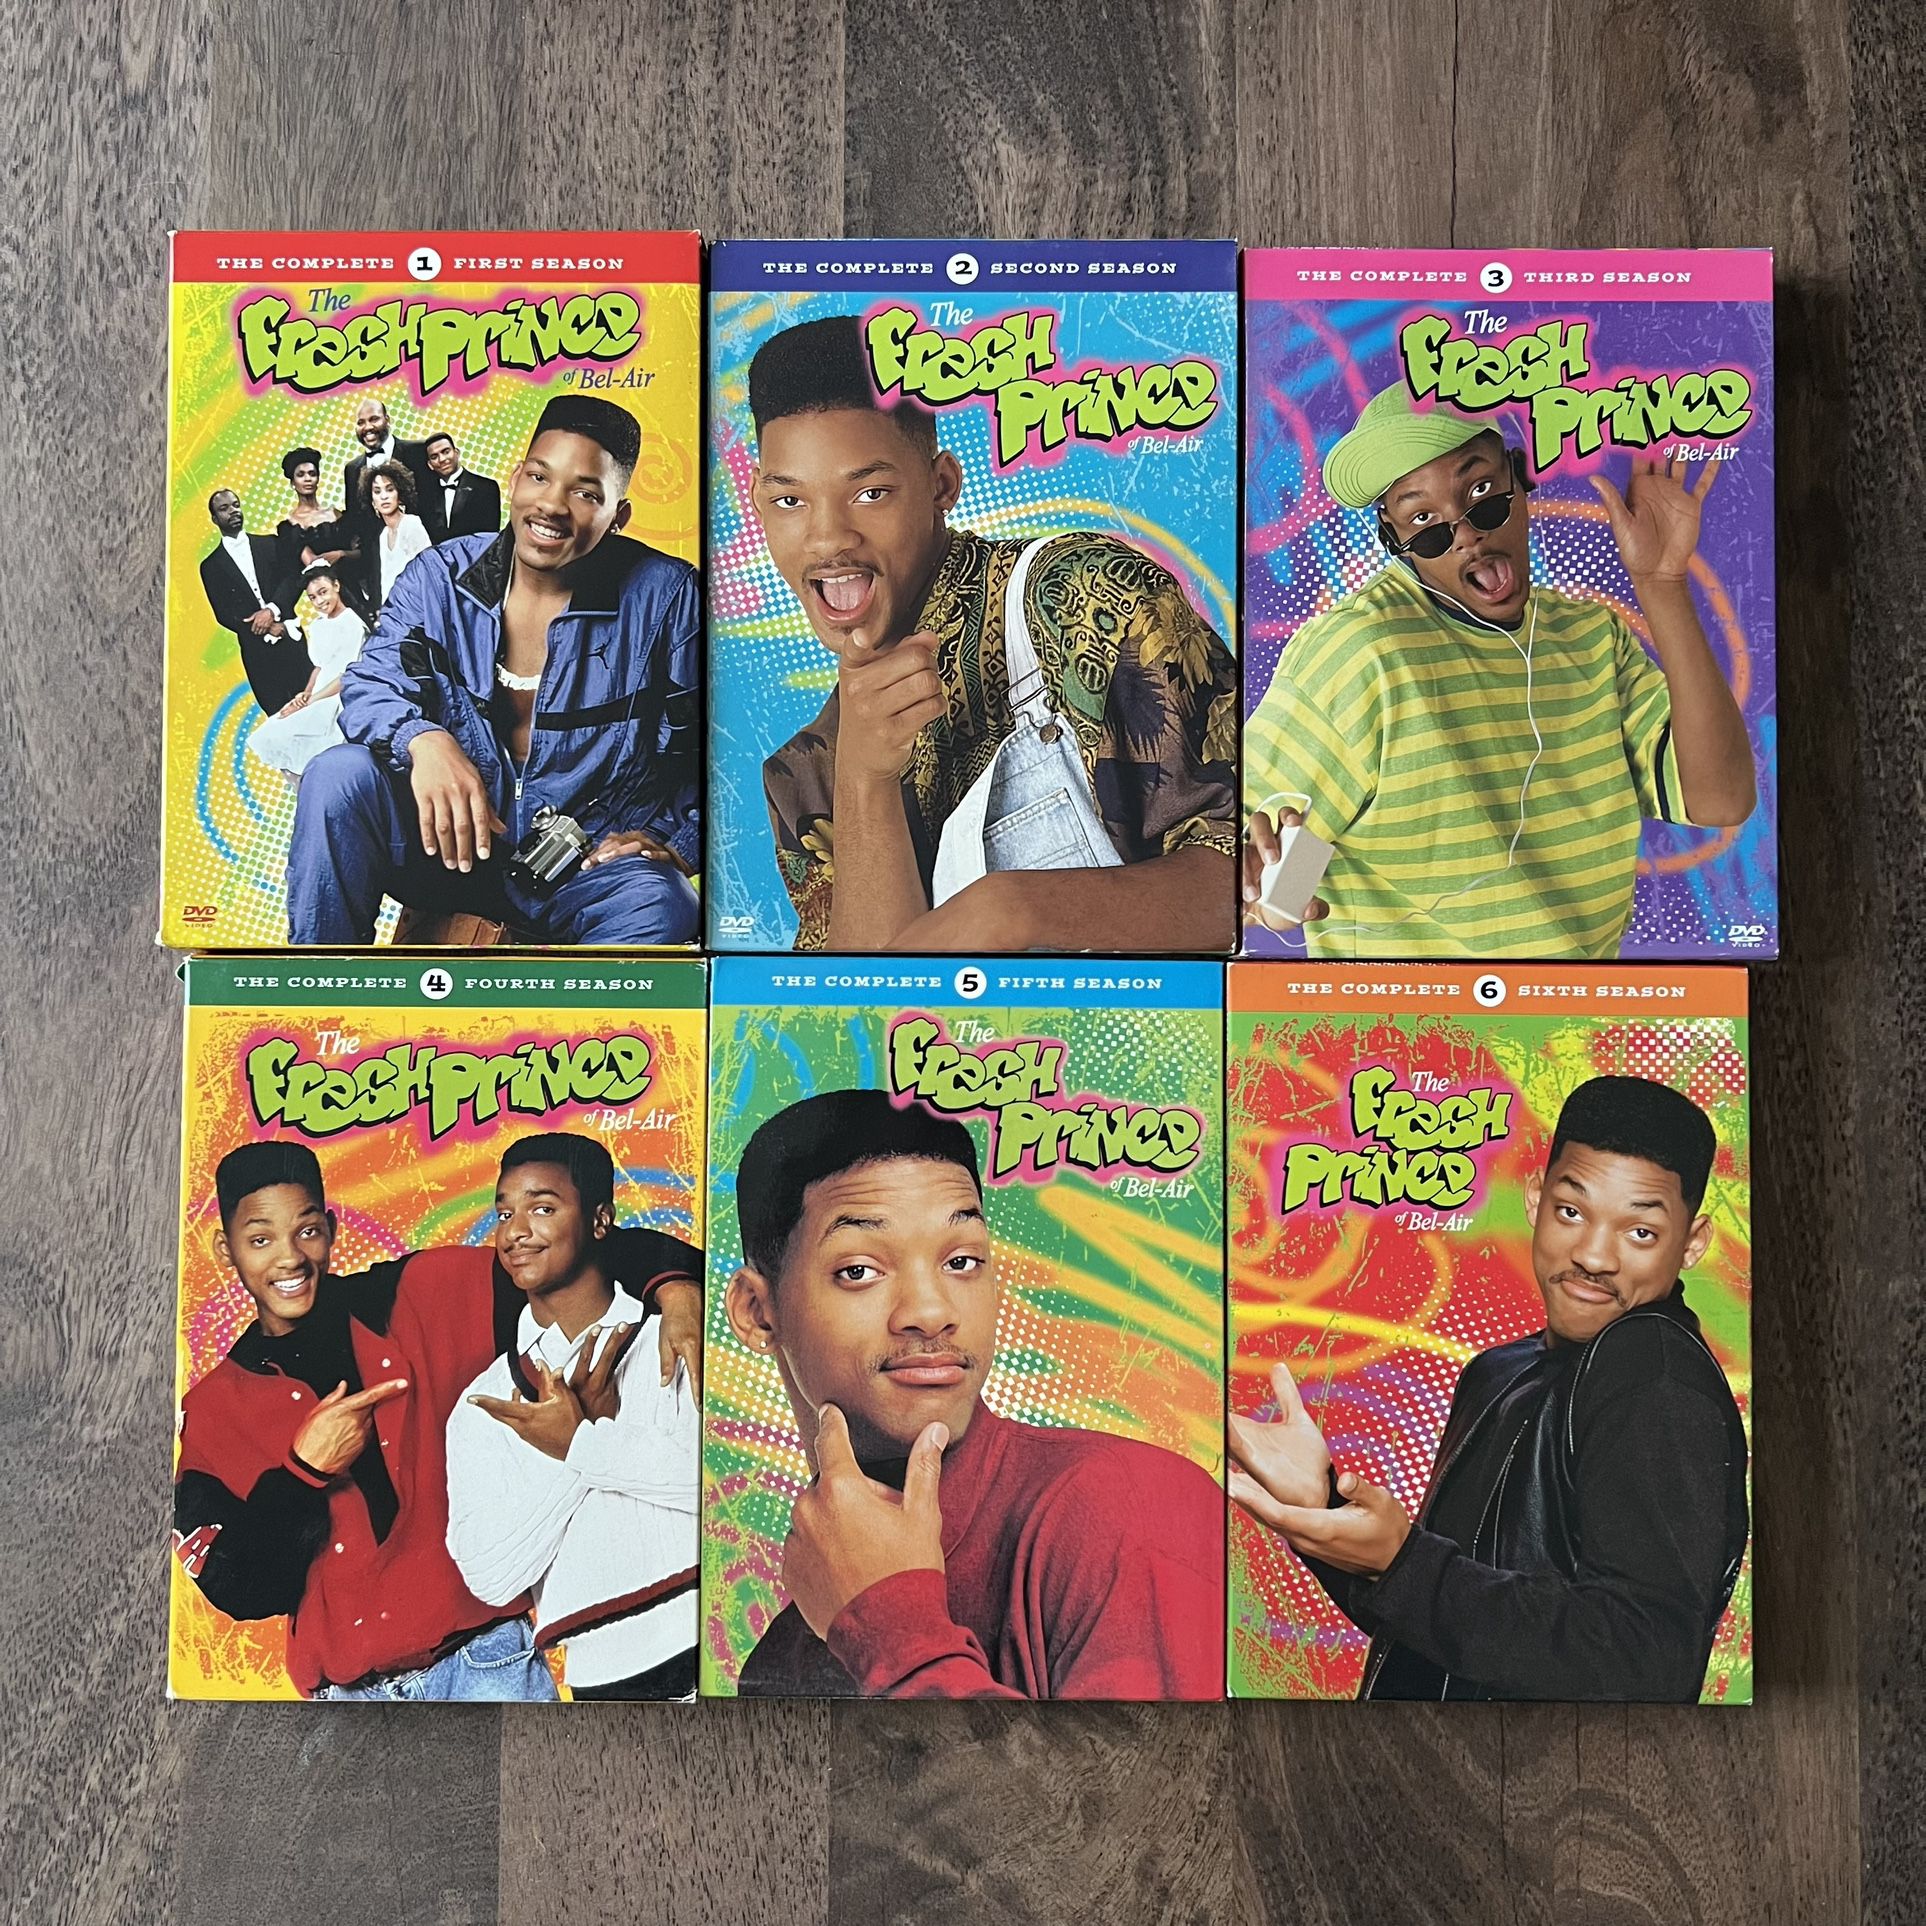 Fresh Prince of Bel-Air Vintage 1990s Comedy TV Show Complete: Seasons 1 - 6